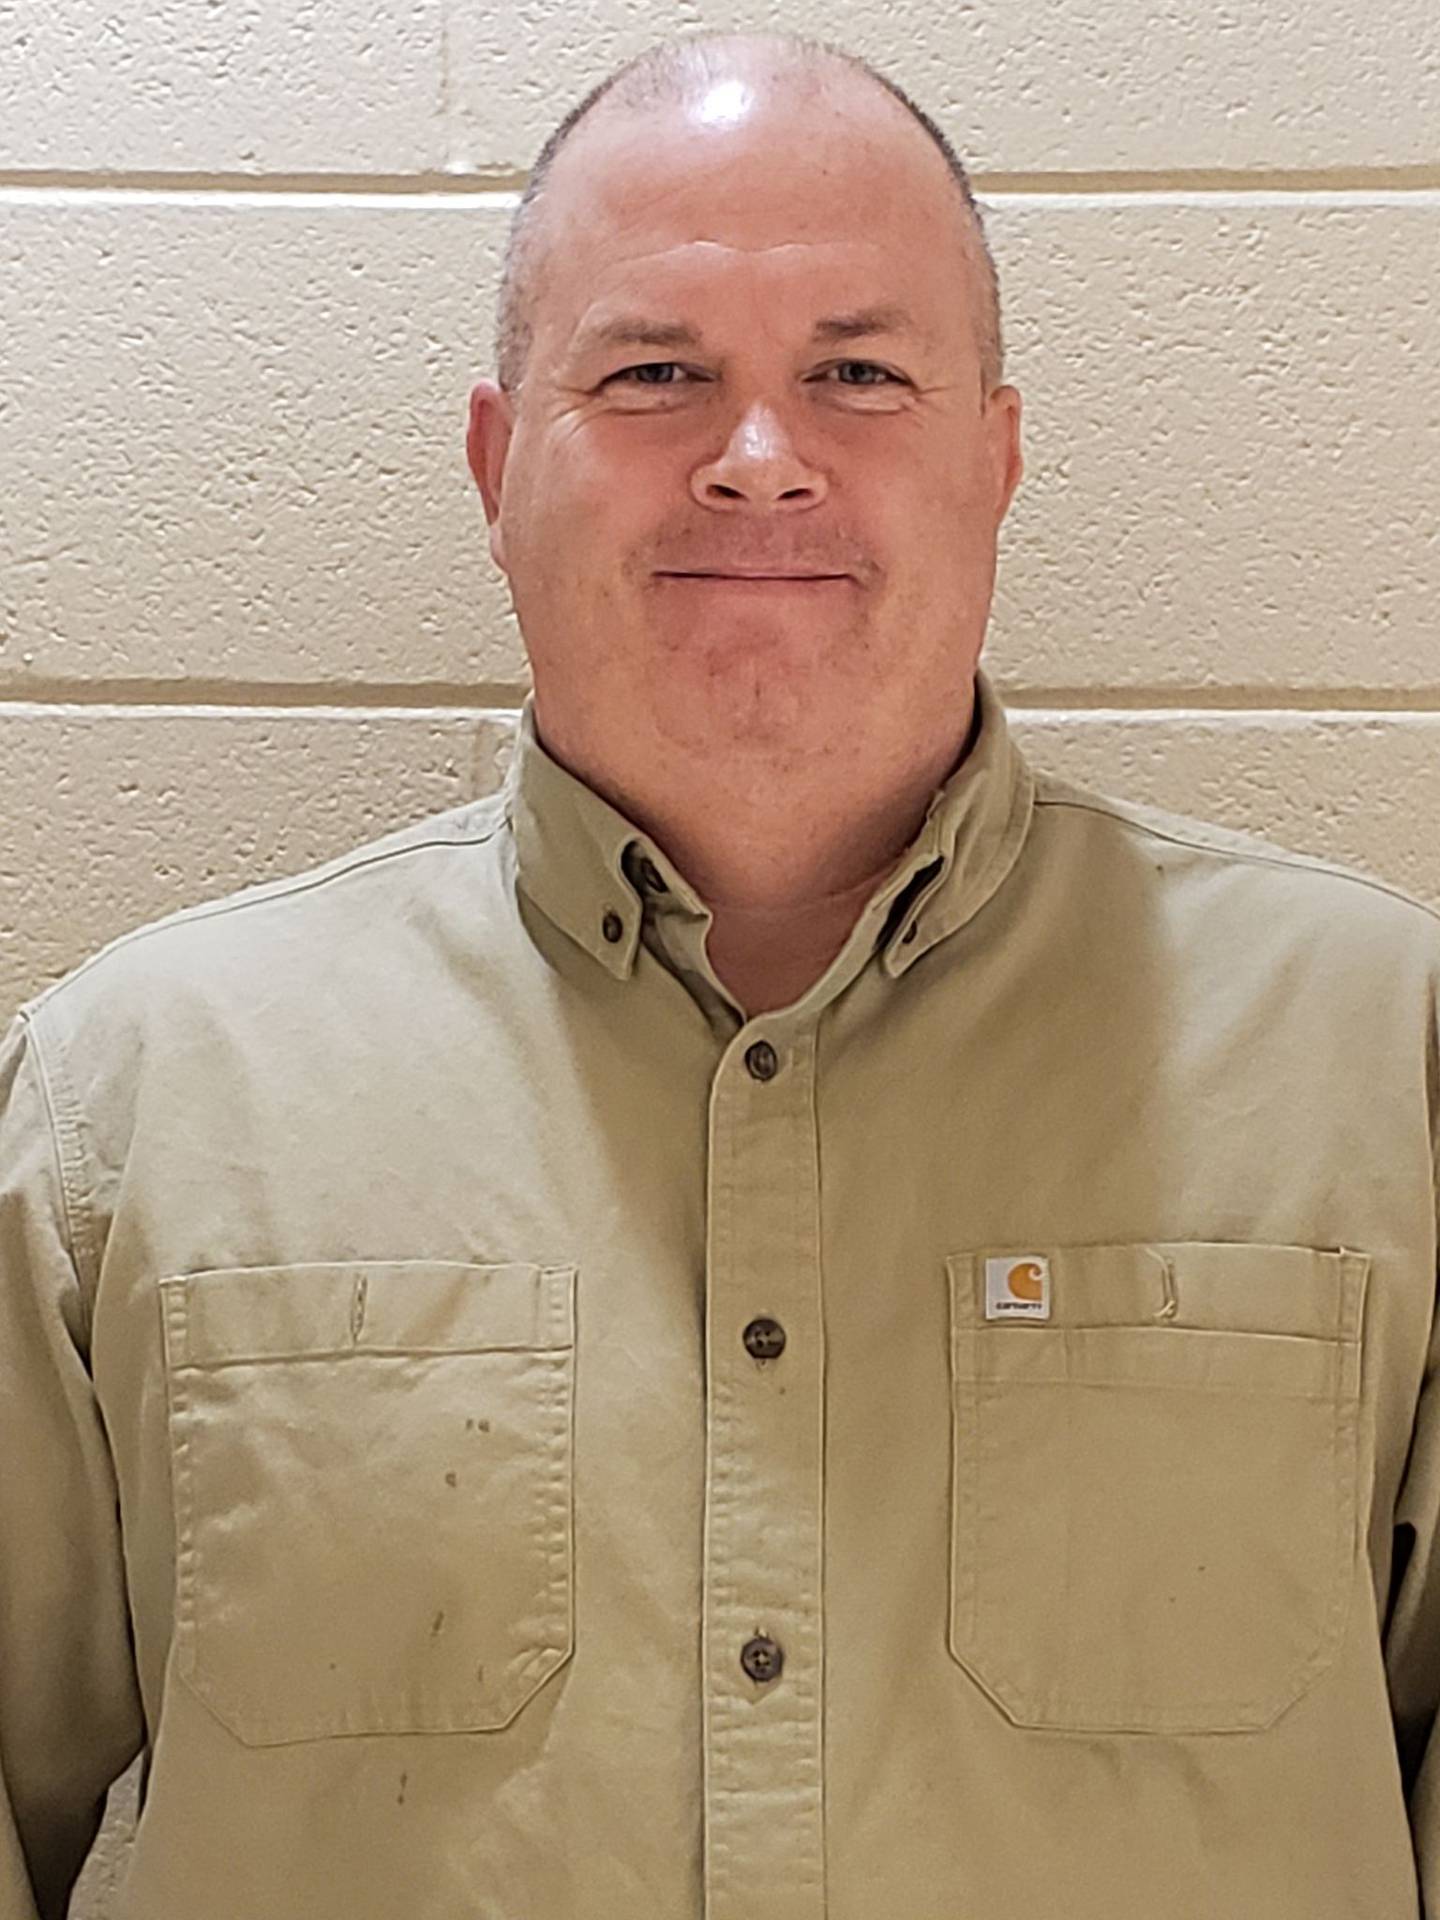 Curt Alsip is the current assistant director for maintenance and grounds at District 202 in Plainfield. Alsip will serve as the new director of facilities.